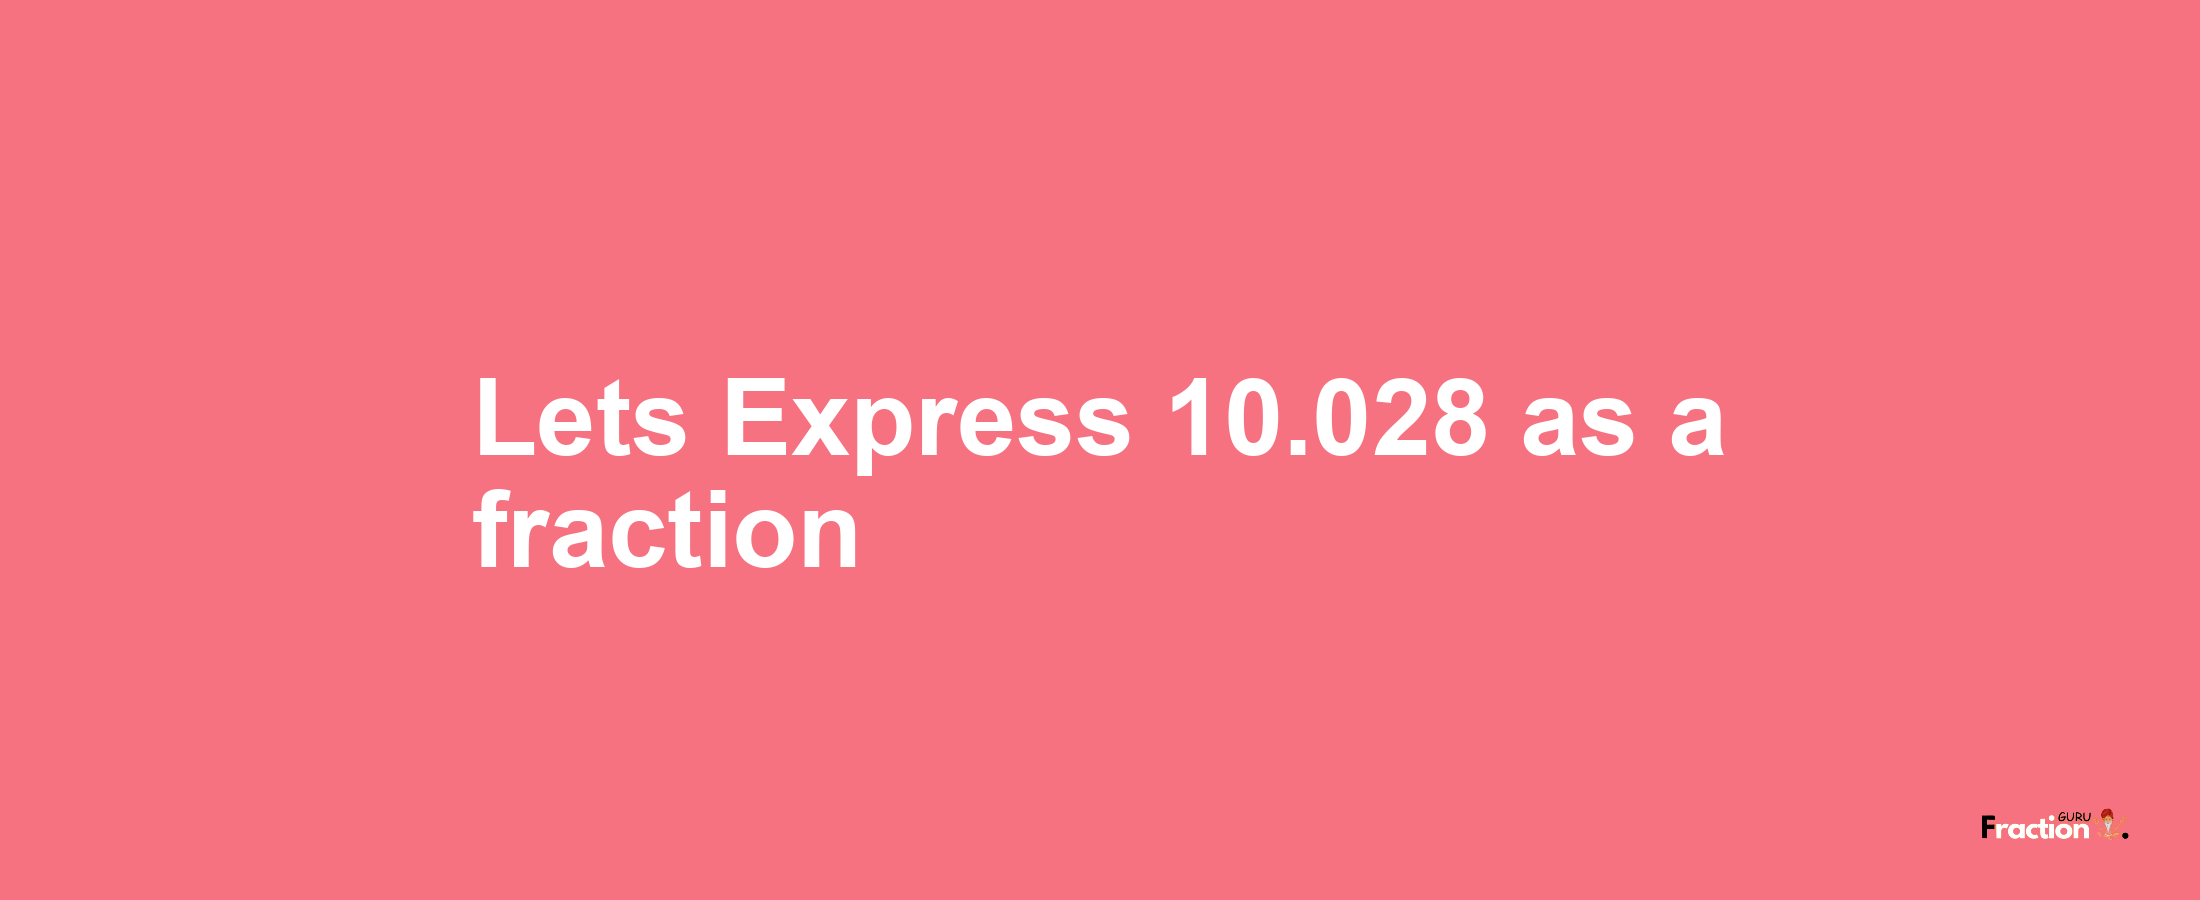 Lets Express 10.028 as afraction